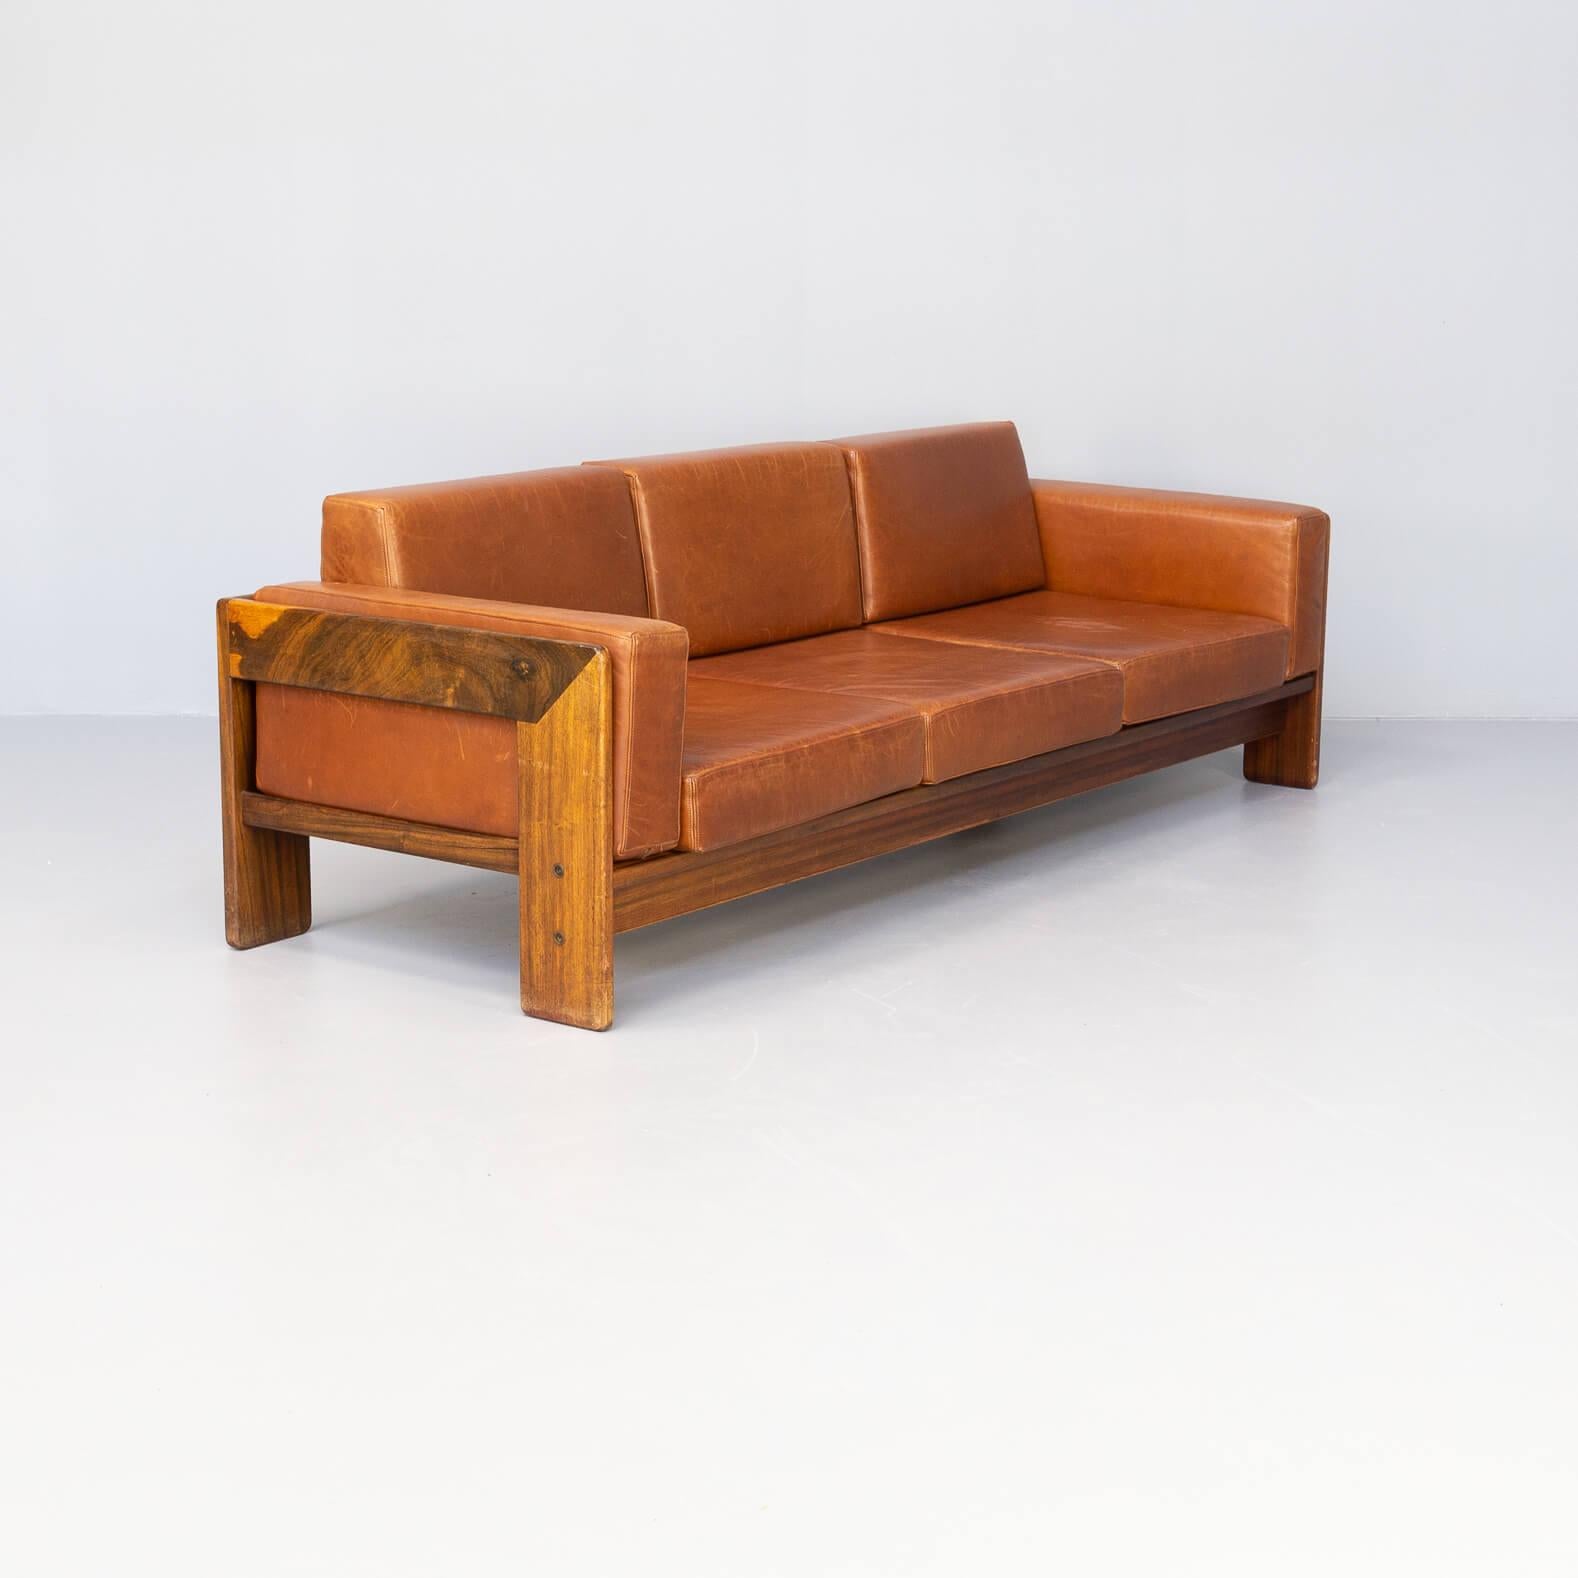 60s Tobia Scarpa ‘Bastiano’ Sofa, Fauteuil & Sidetable Set for Knoll For Sale 3